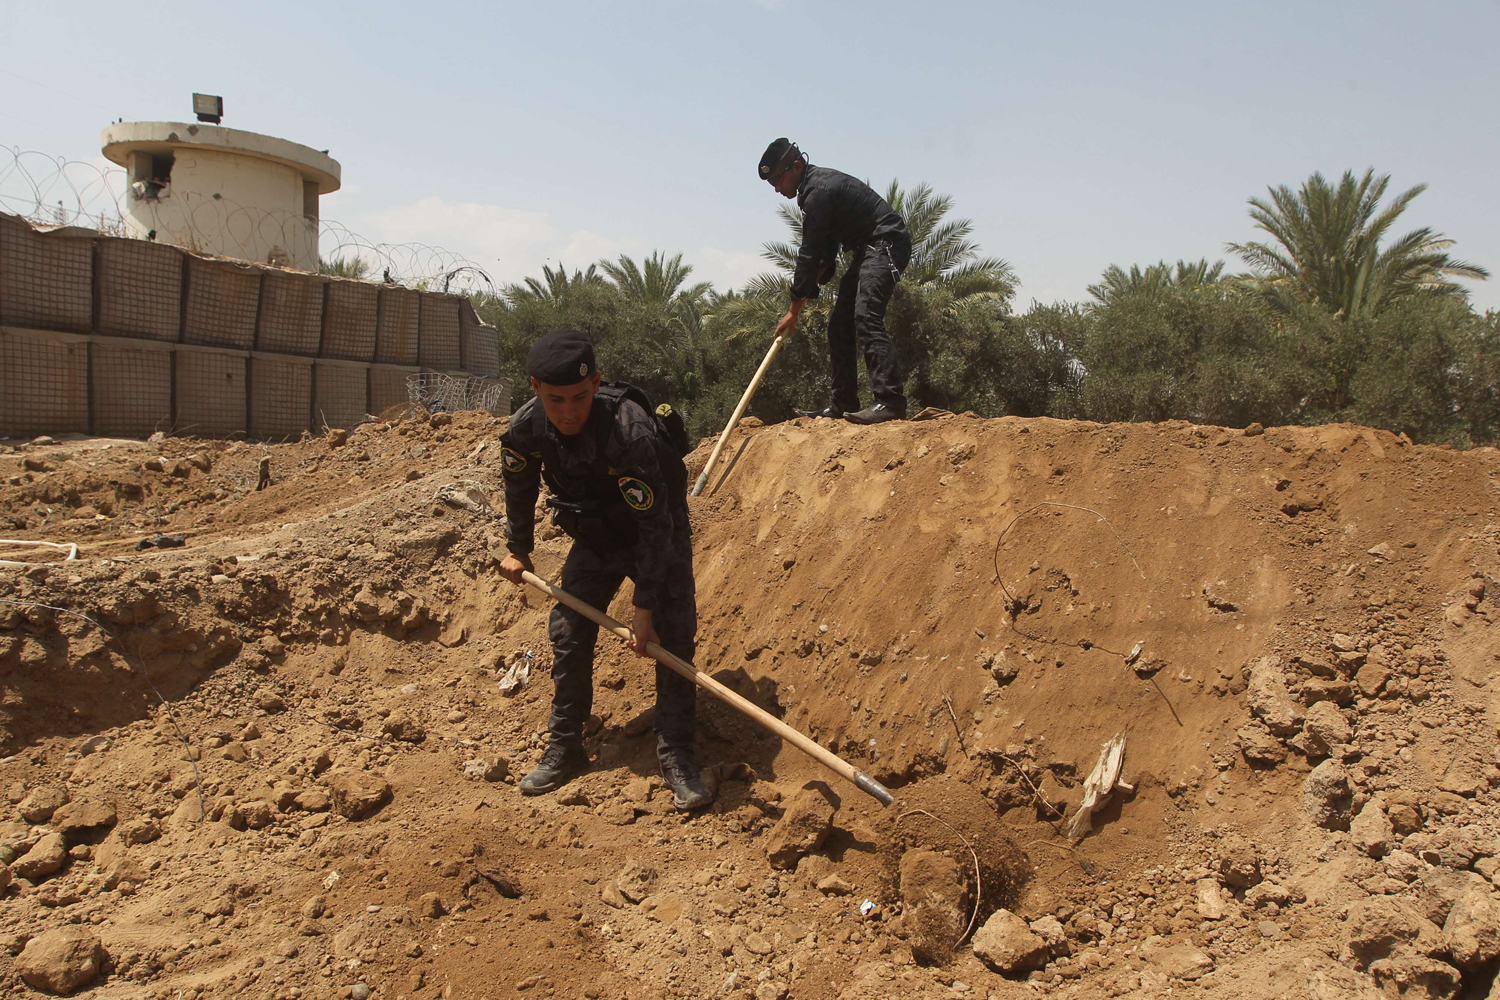 Iraqi policemen dig trenches at checkpoint in the Iraqi town of Taji, at the entrance of Baghdad, on June 13, 2014, as security forces are bolstering defenses in the capital.